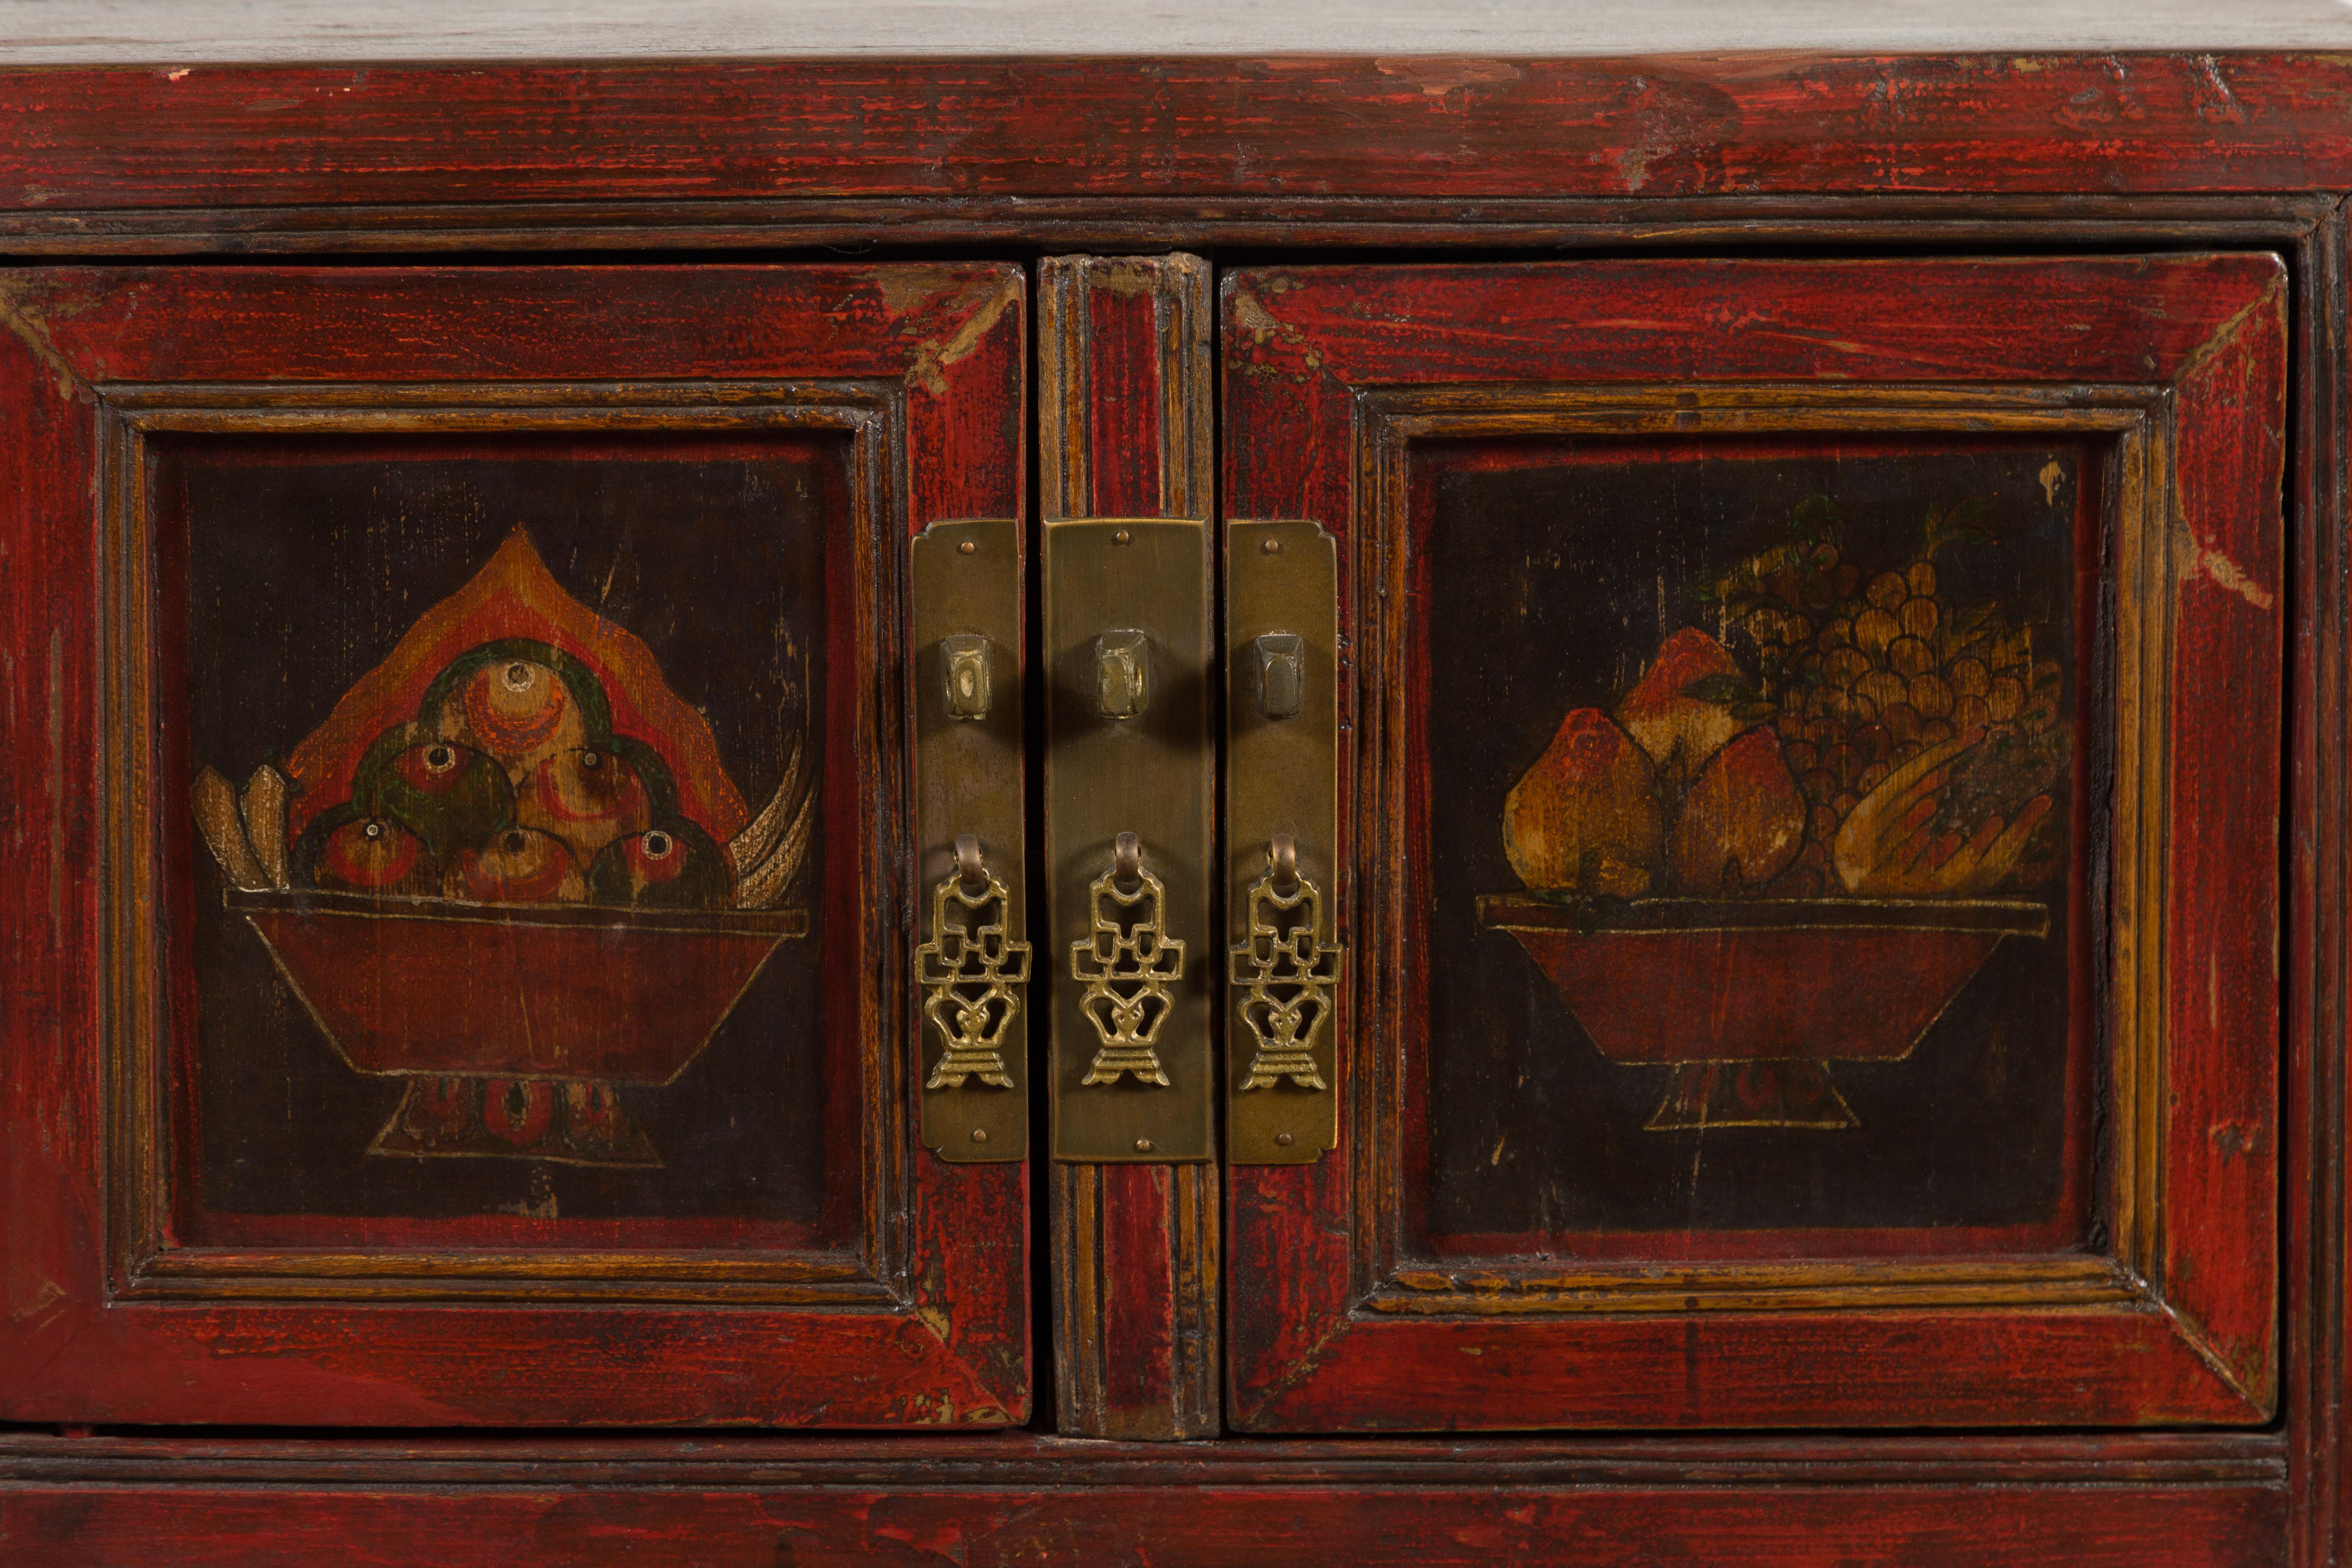 Chinese Qing Dynasty 19th Century Red Lacquer Cabinet with Painted Fruit Baskets In Good Condition For Sale In Yonkers, NY